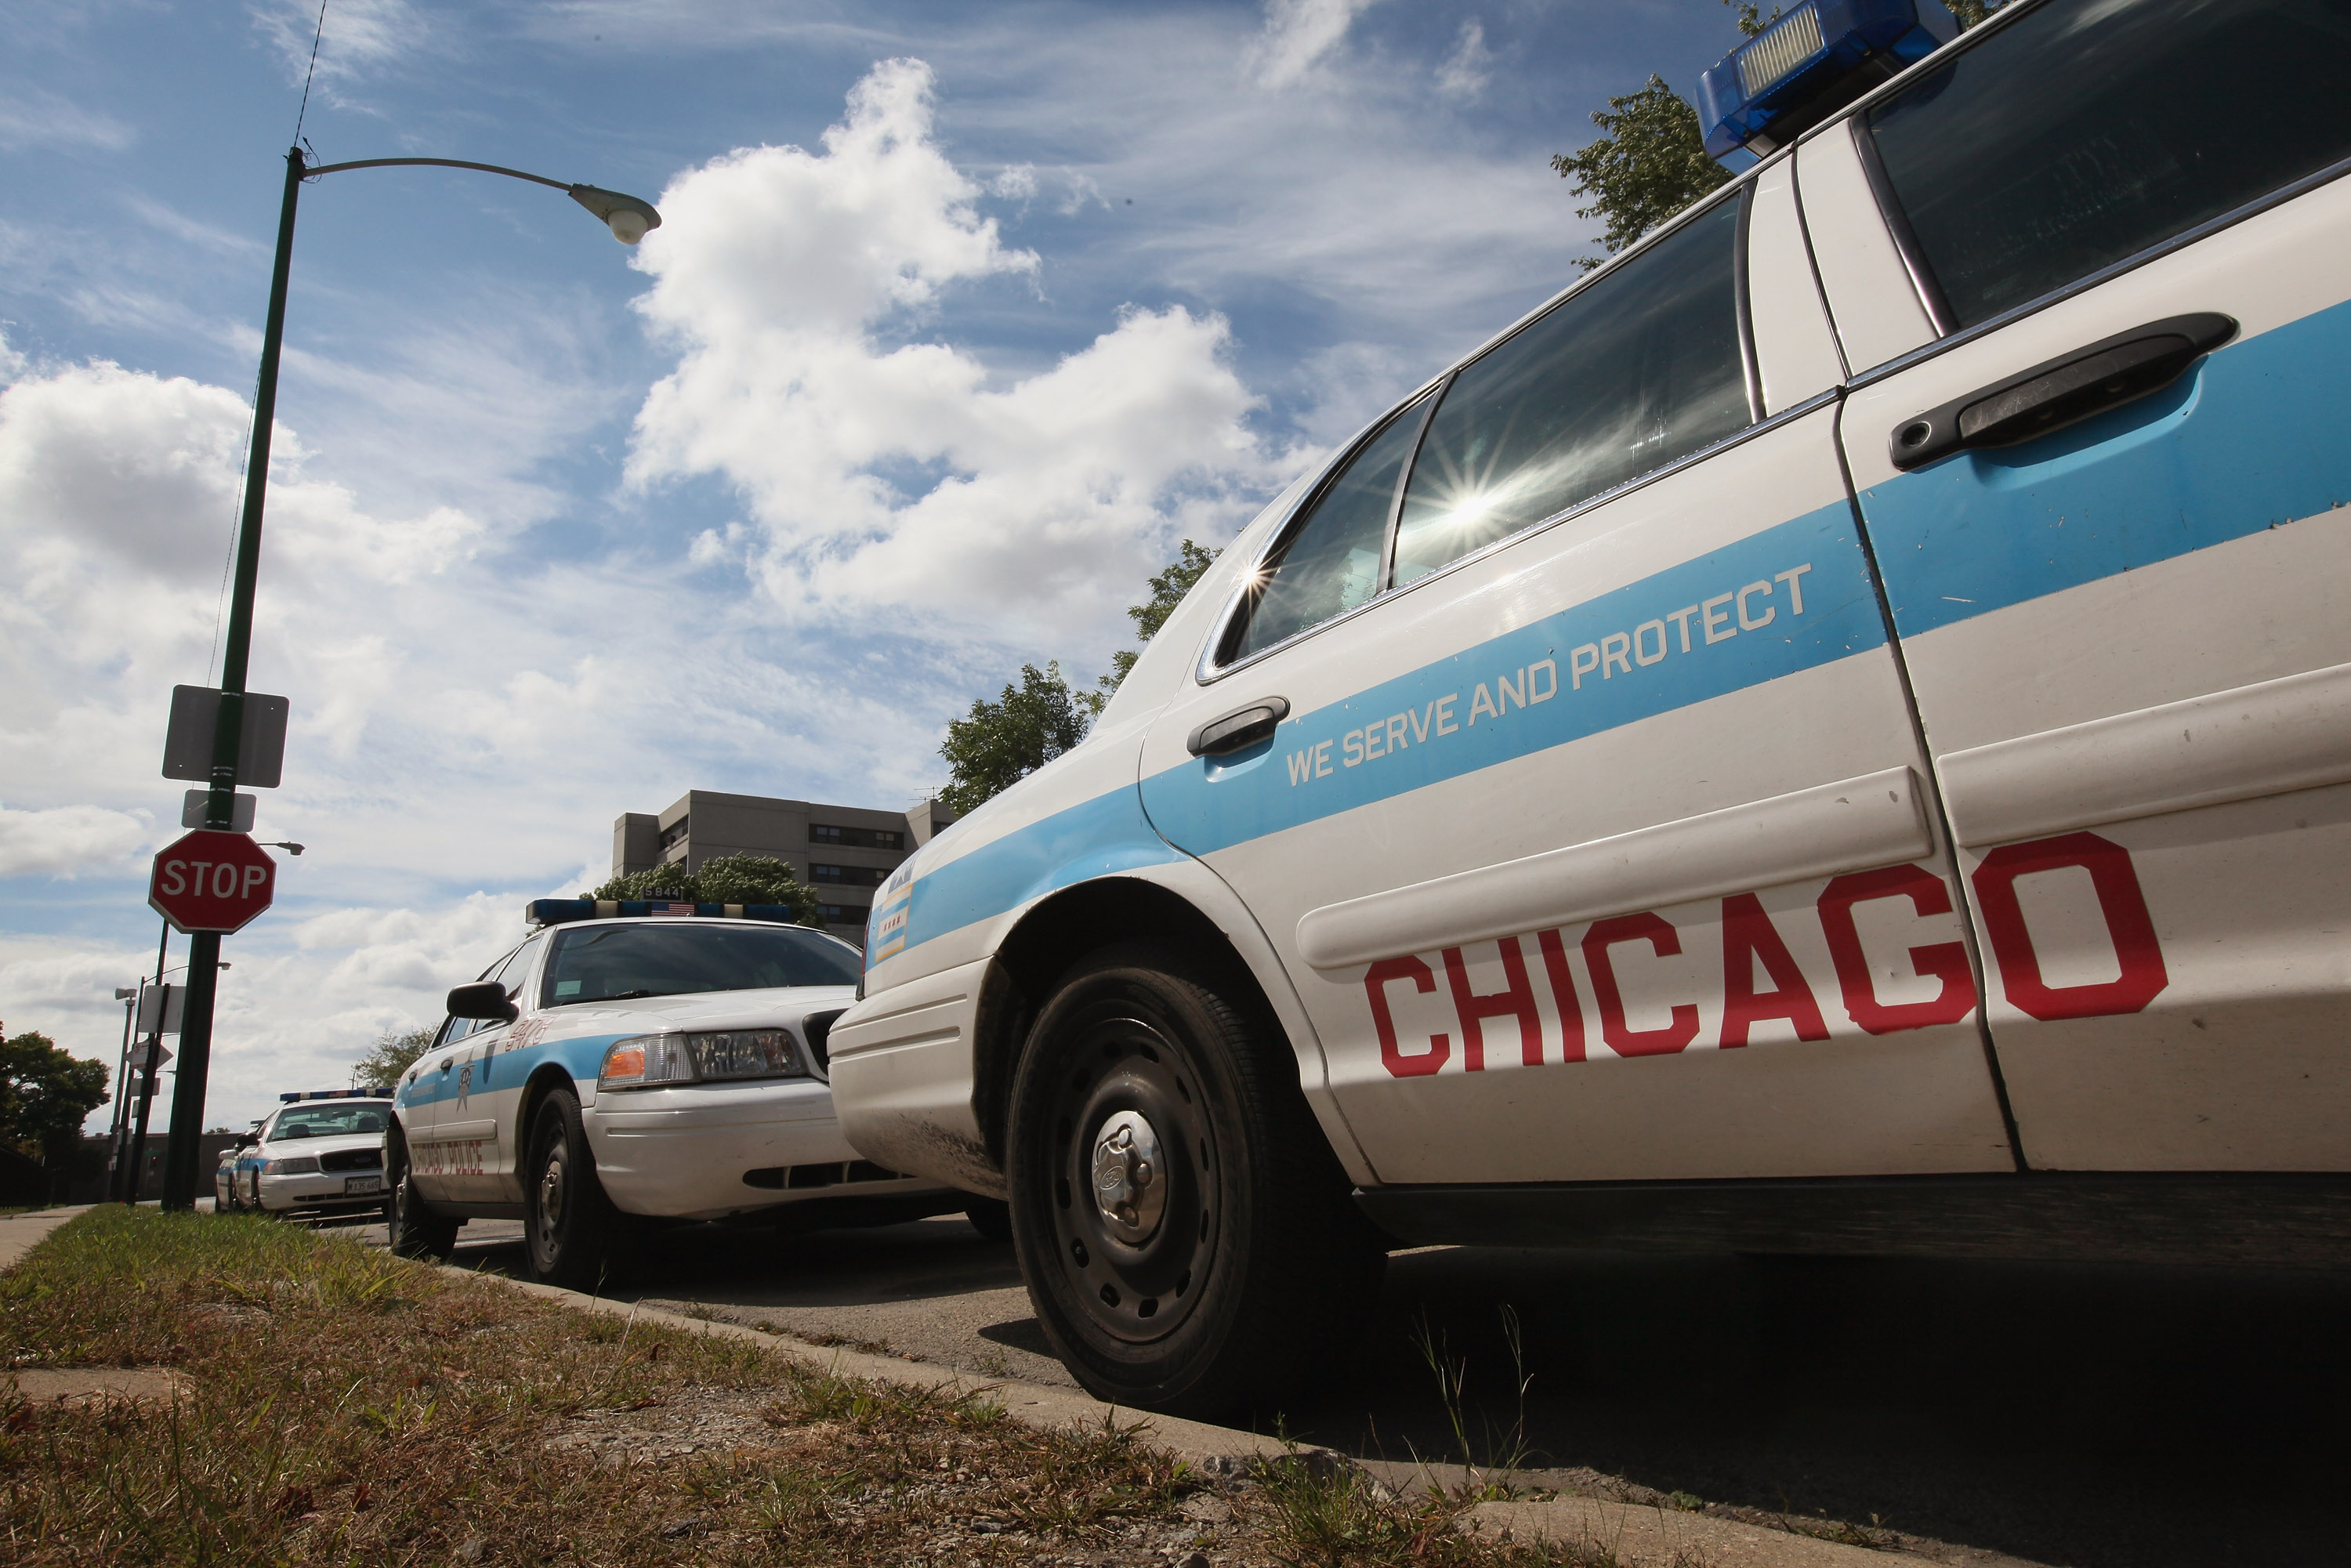 Chicago police cars.